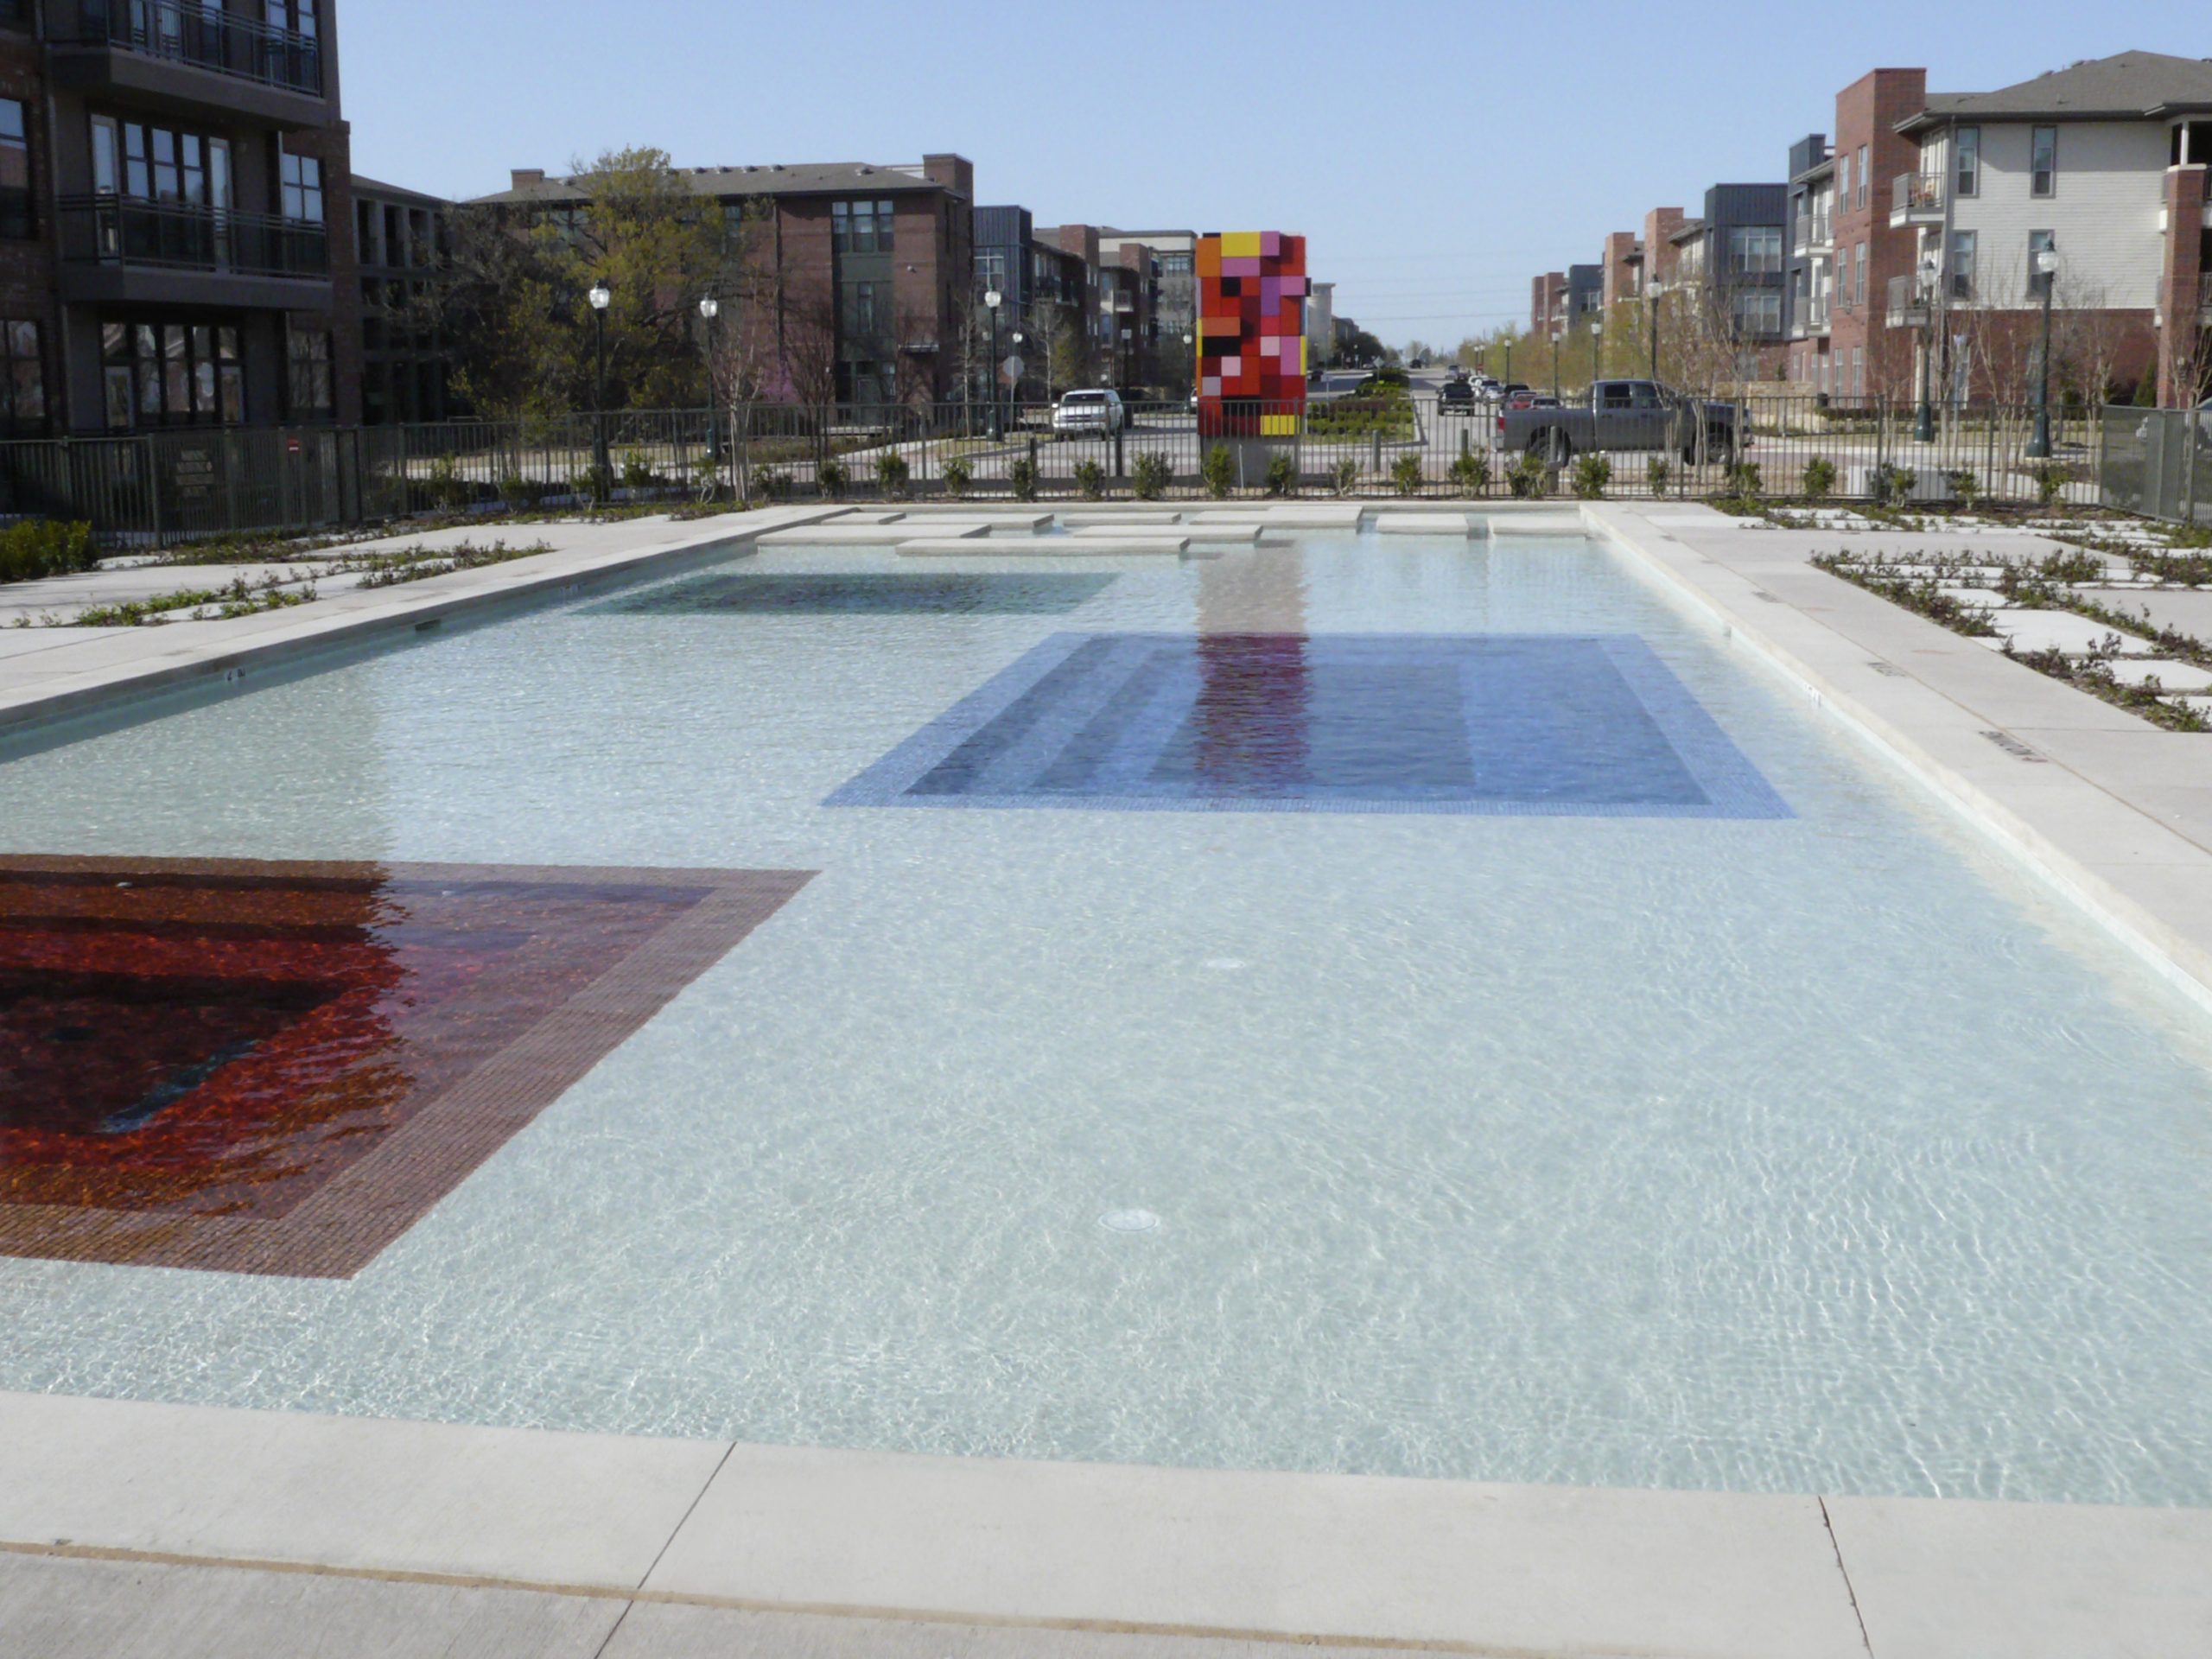 Contemplation Plaza and Sawyer Pool